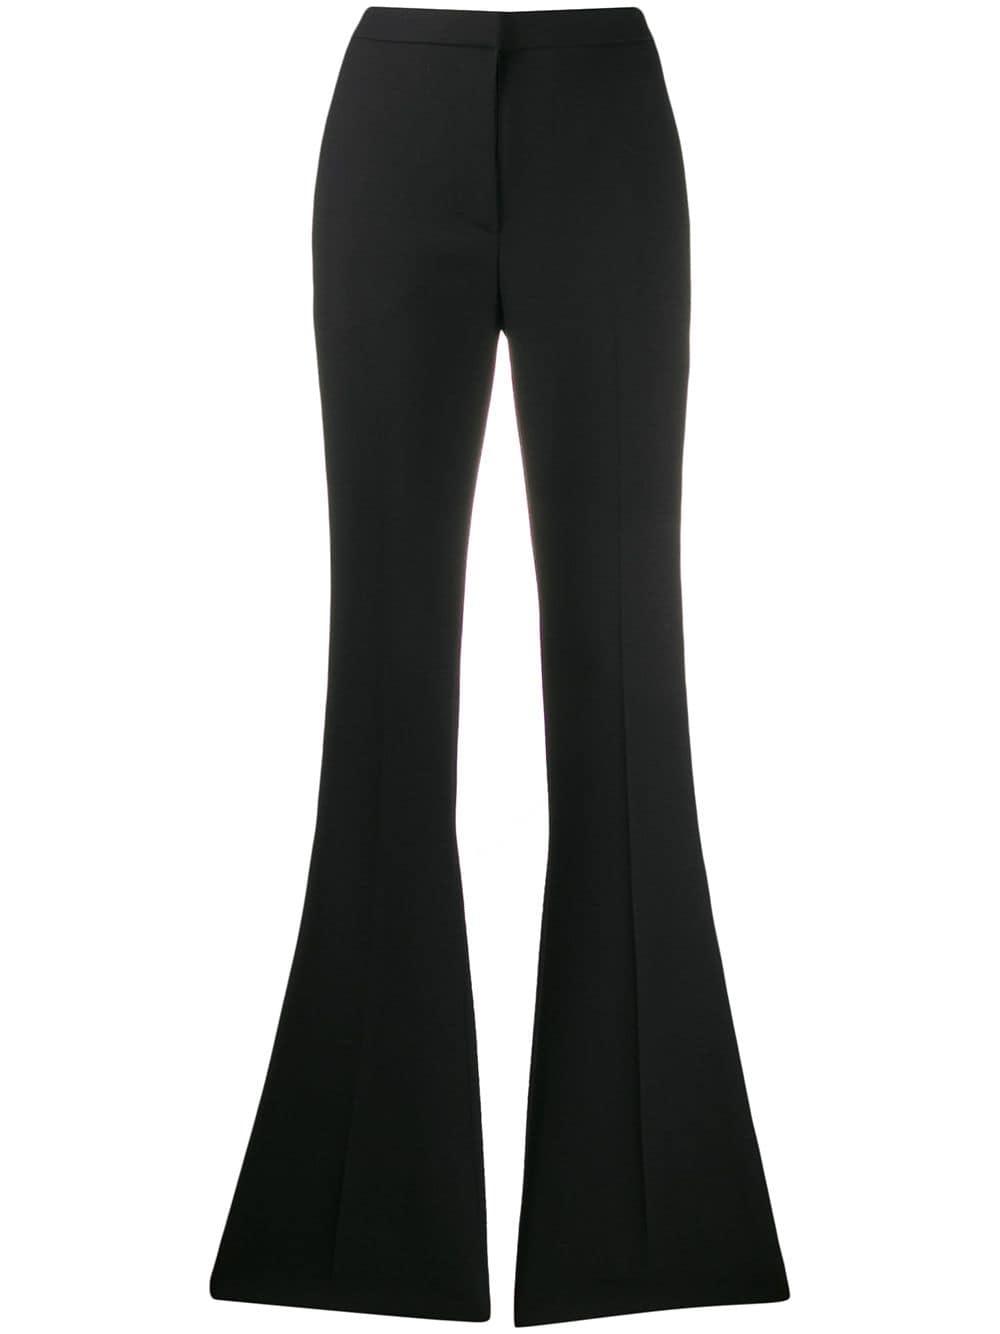 Alexander McQueen High-rise Flared Tailored Trousers in Black - Lyst